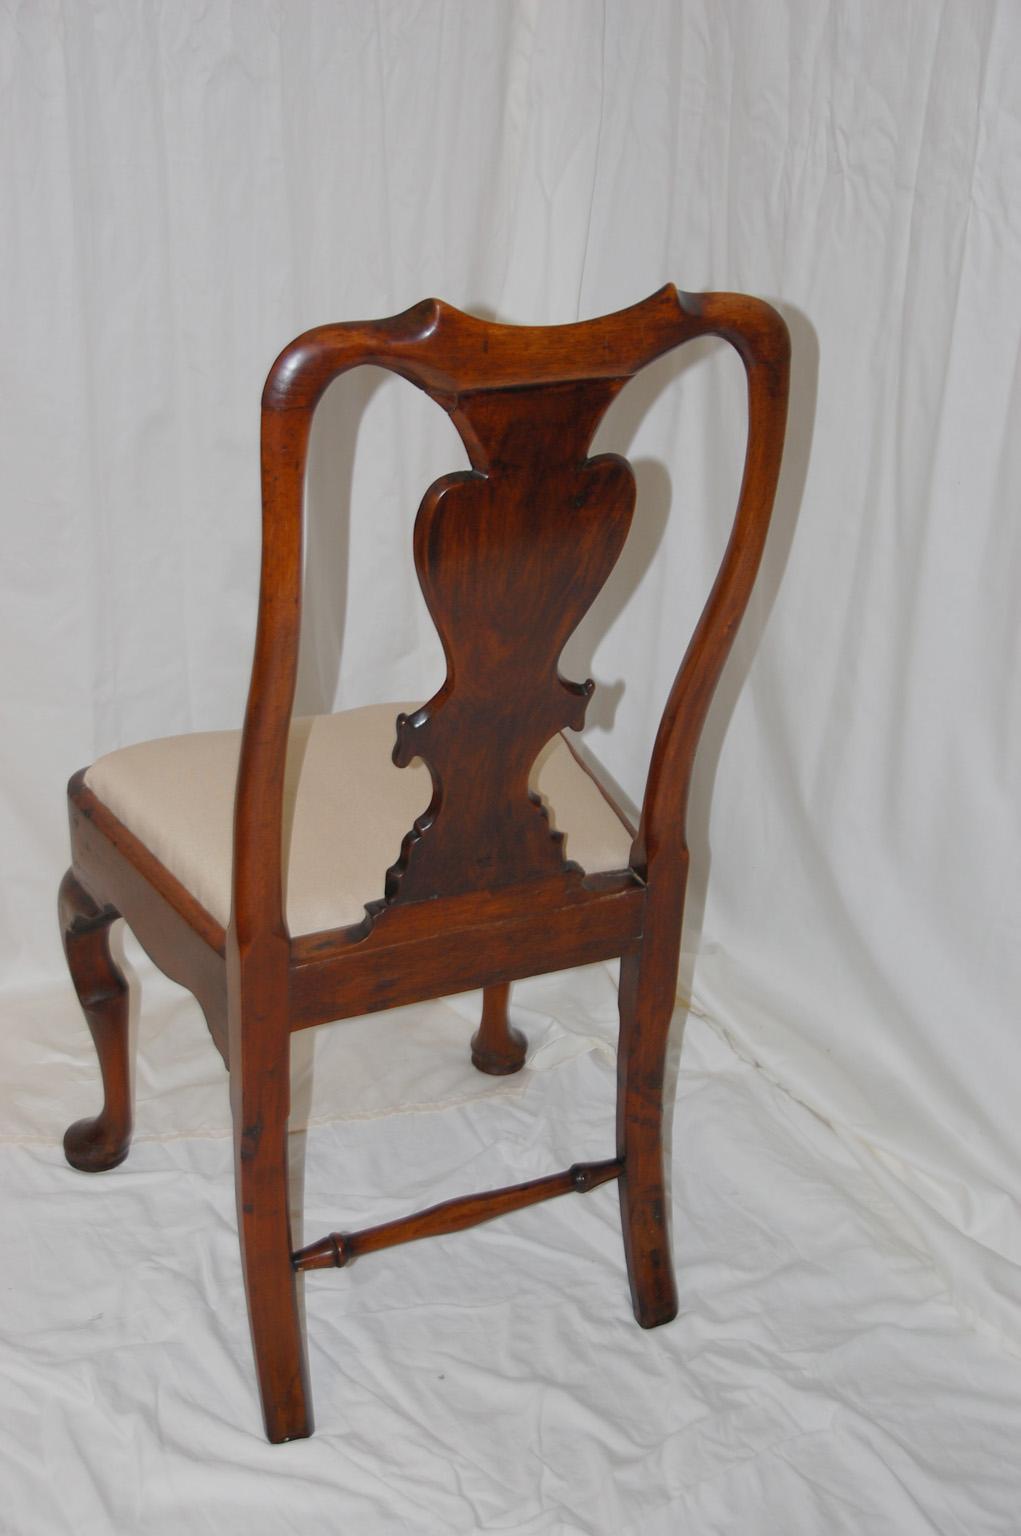 English Early 18th Century Queen Anne Walnut Side Chair with Cabriole Legs For Sale 1